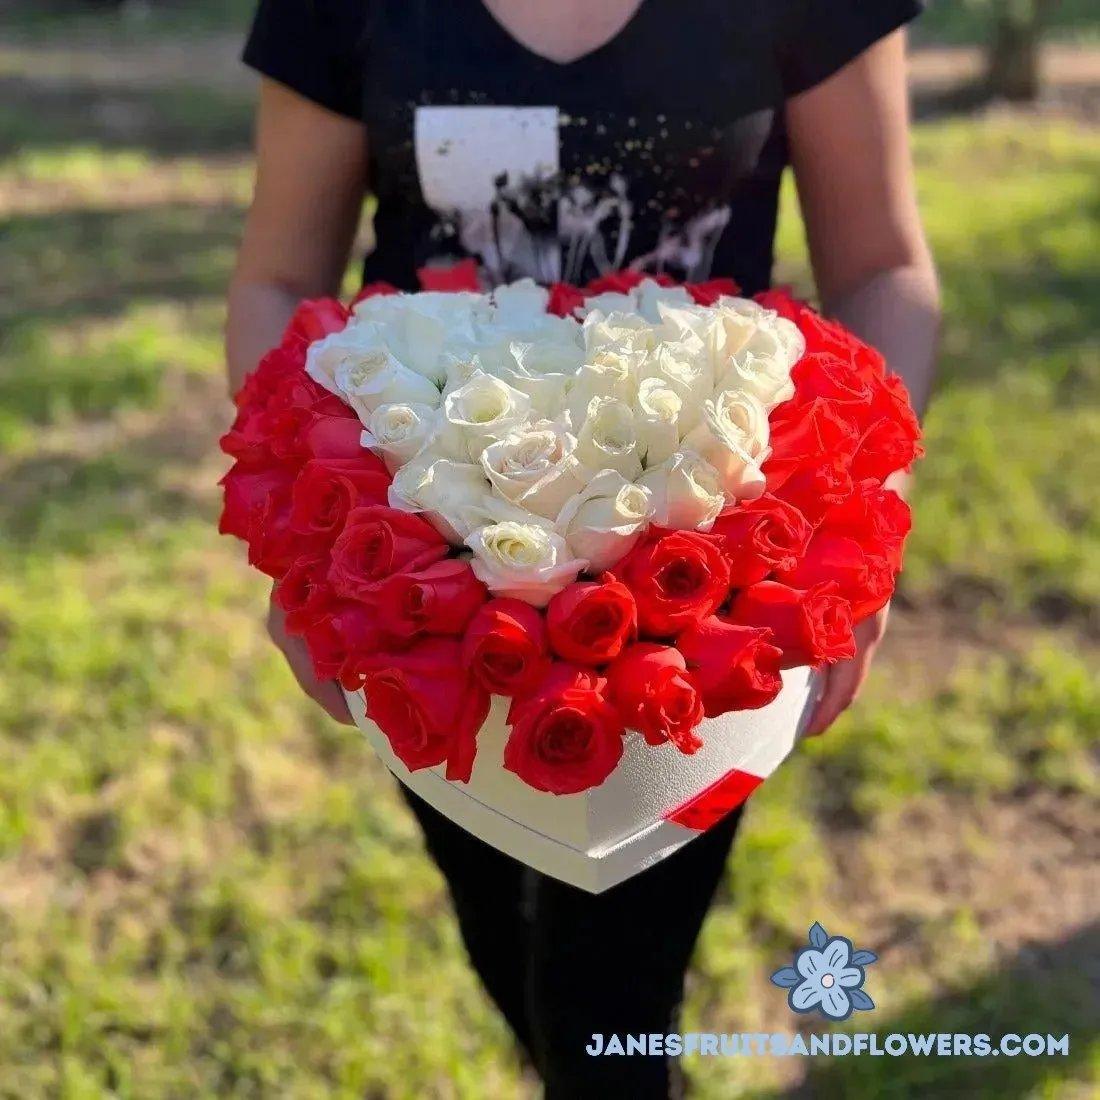 3D Heart Bouquet - Janes Fruits and Flowers